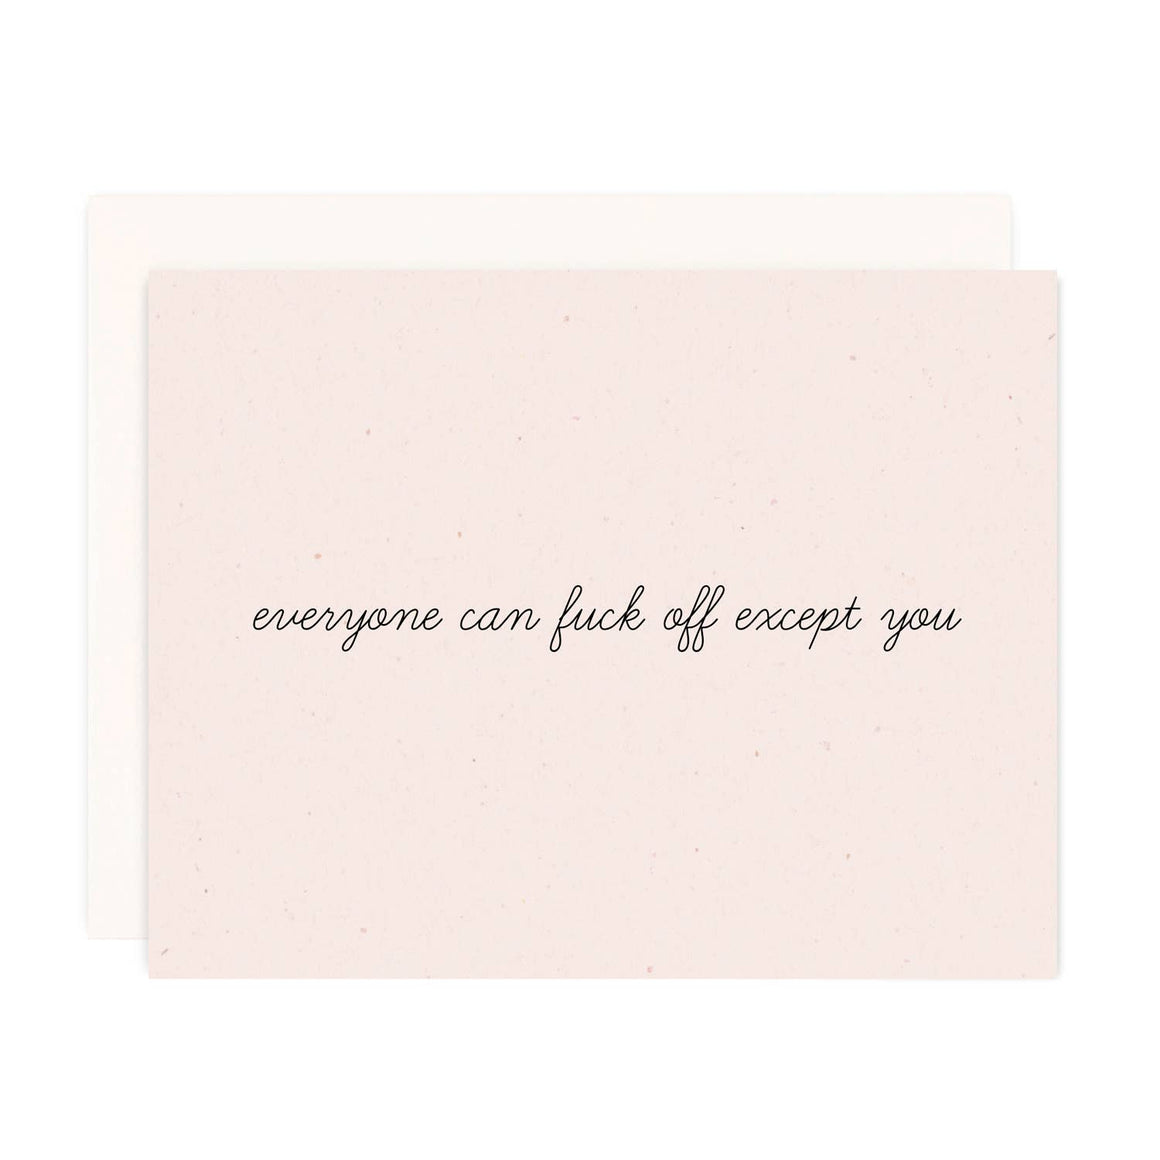 Everyone Can Fuck Off Except You Card